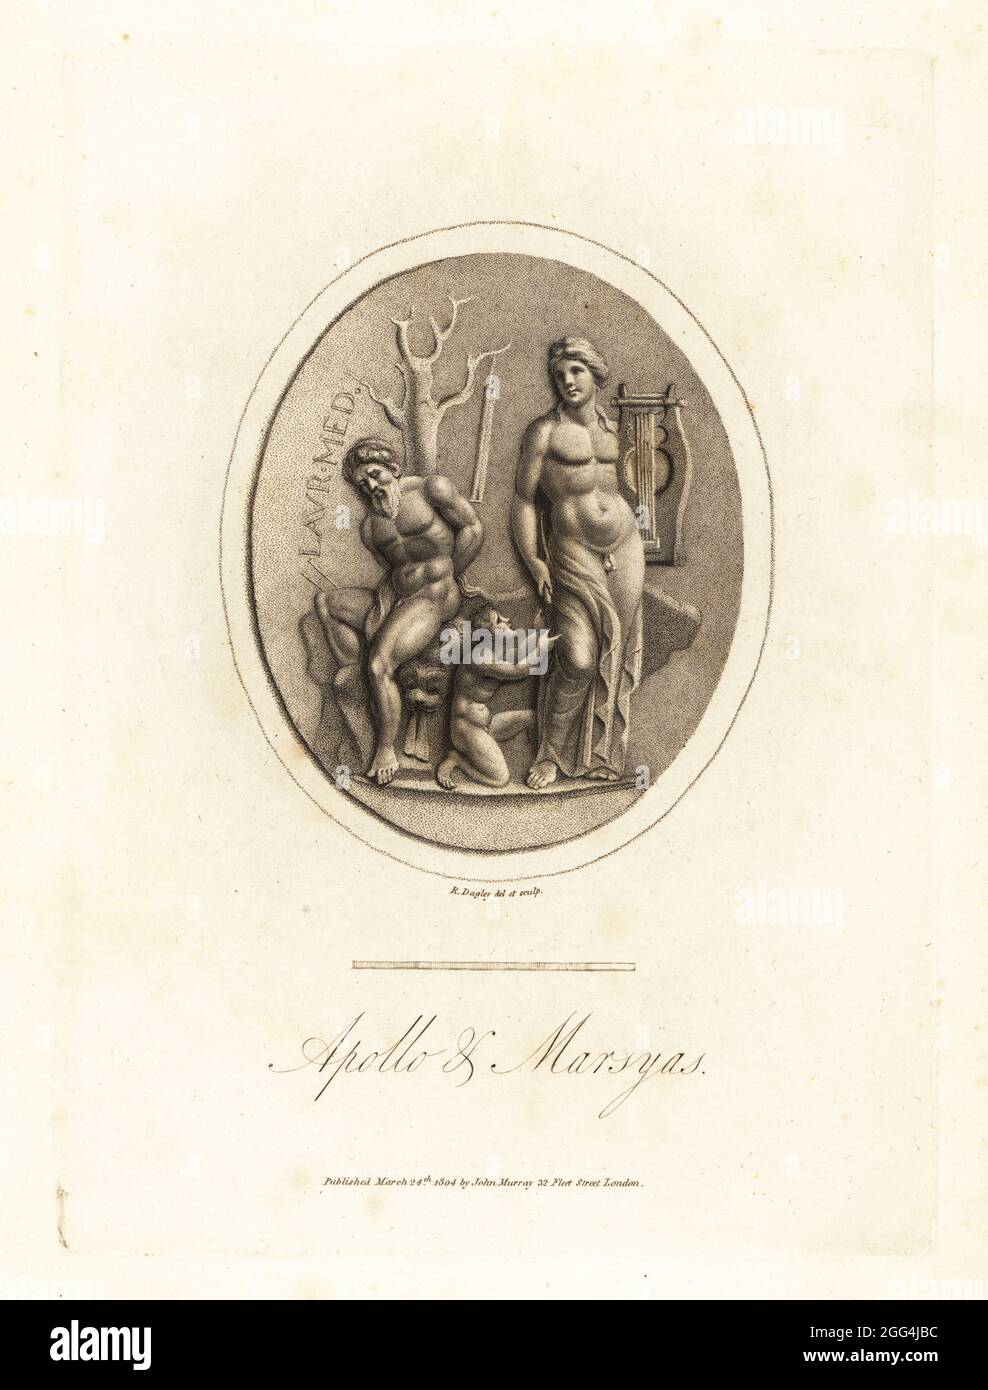 Apollo, god of music and dance, and the satyr Marsyas. Apollo stands with a lyre, while Marsyas is tied to a tree to be flayed alive after their contest. In red jasper in the Farnese cabinet Naples. opperplate engraving drawn and engraved by Richard Dagley from Gems, Selected from the Antique, with Illustrations, John Murray, London, 1804. Stock Photo